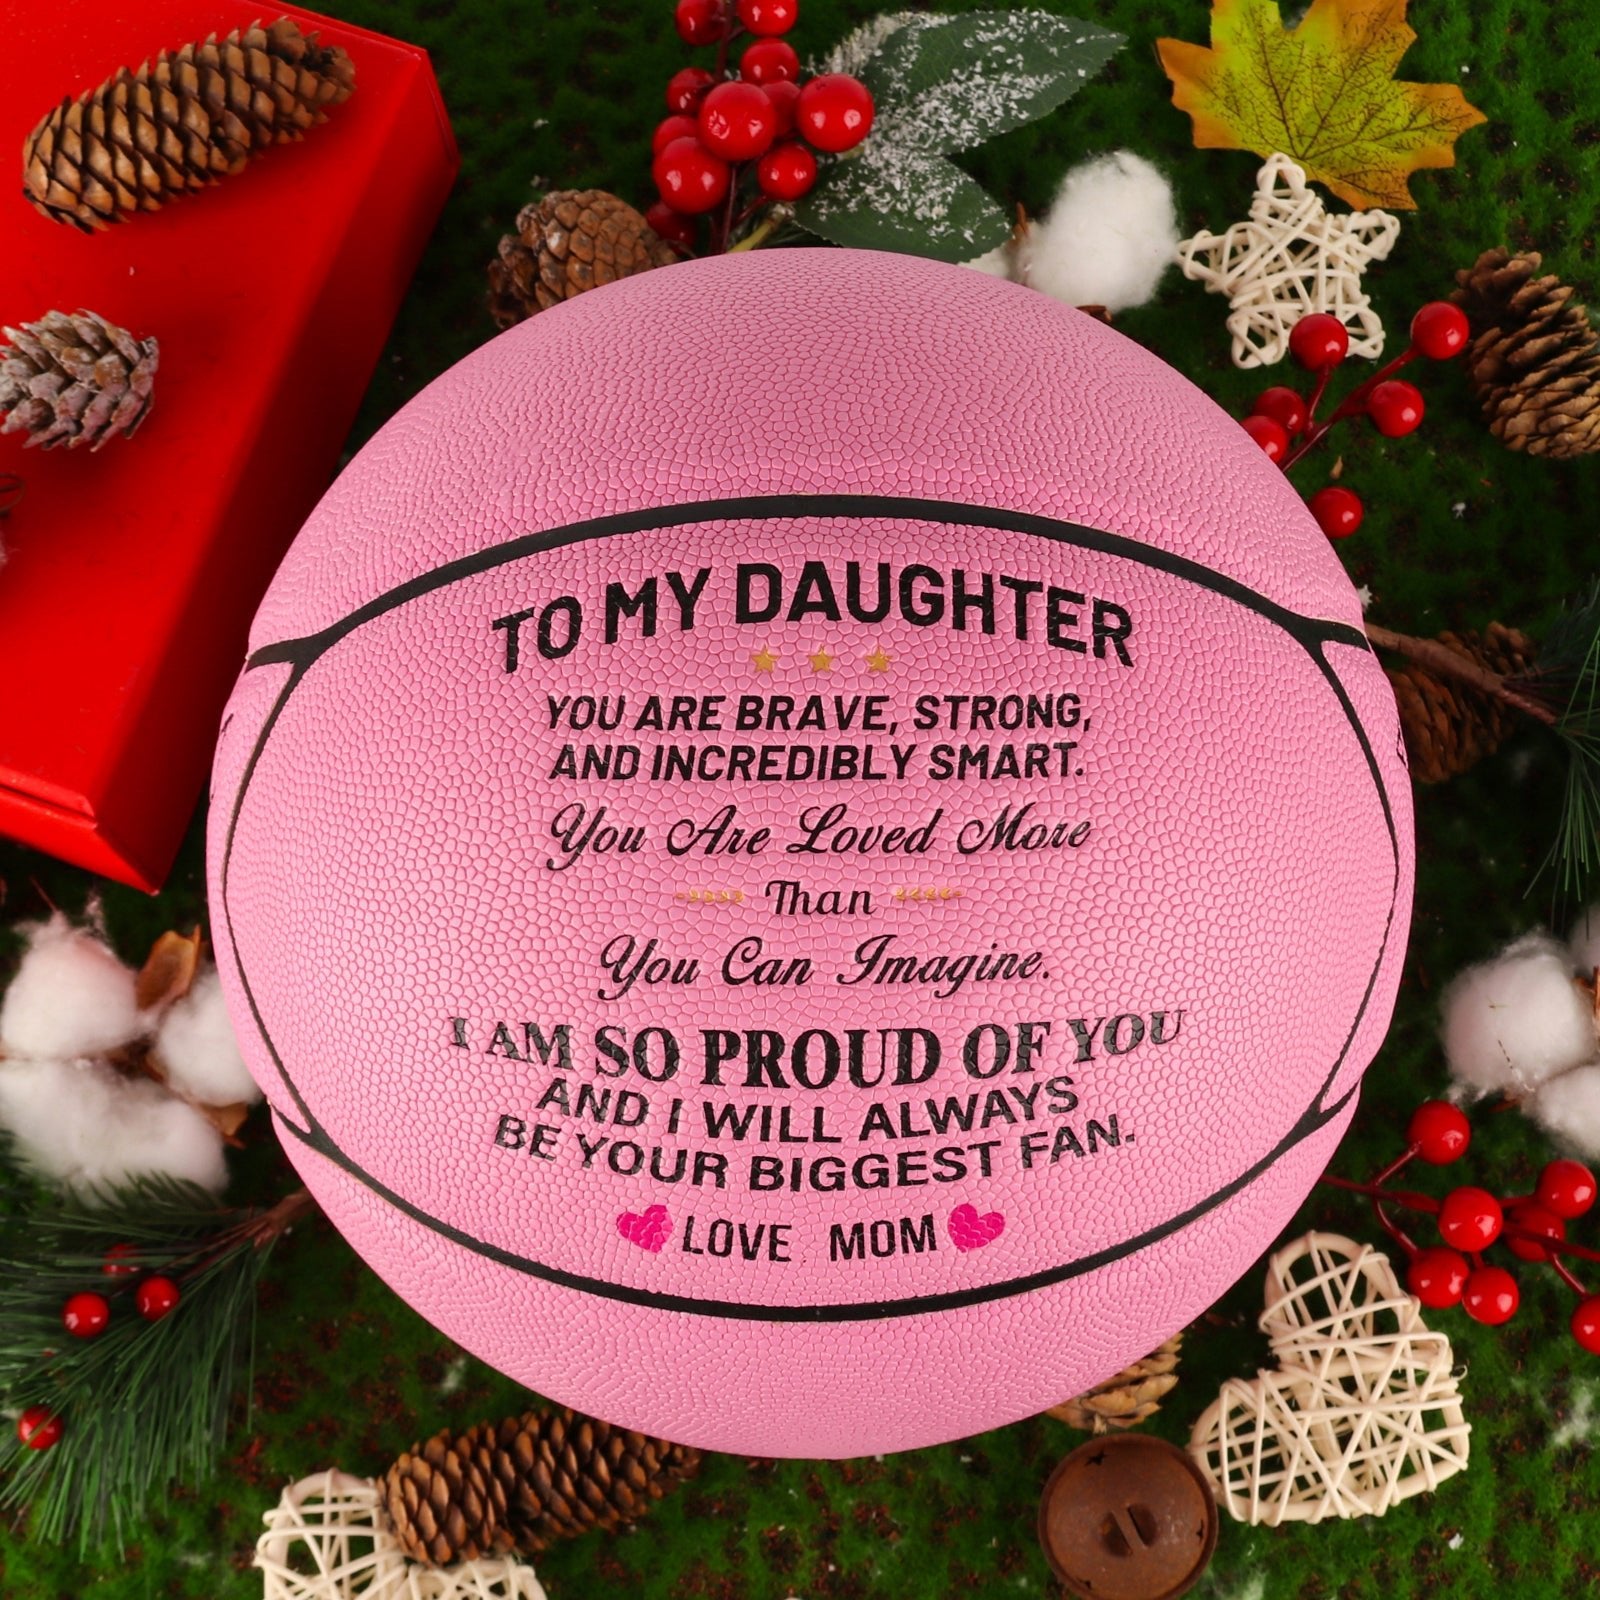 Personalized Letter Basketball For Daughter, Basketball Indoor/Outdoor Game Ball For Girl, Birthday Christmas Gift For Daughter From Mom, Pink - Family Watchs